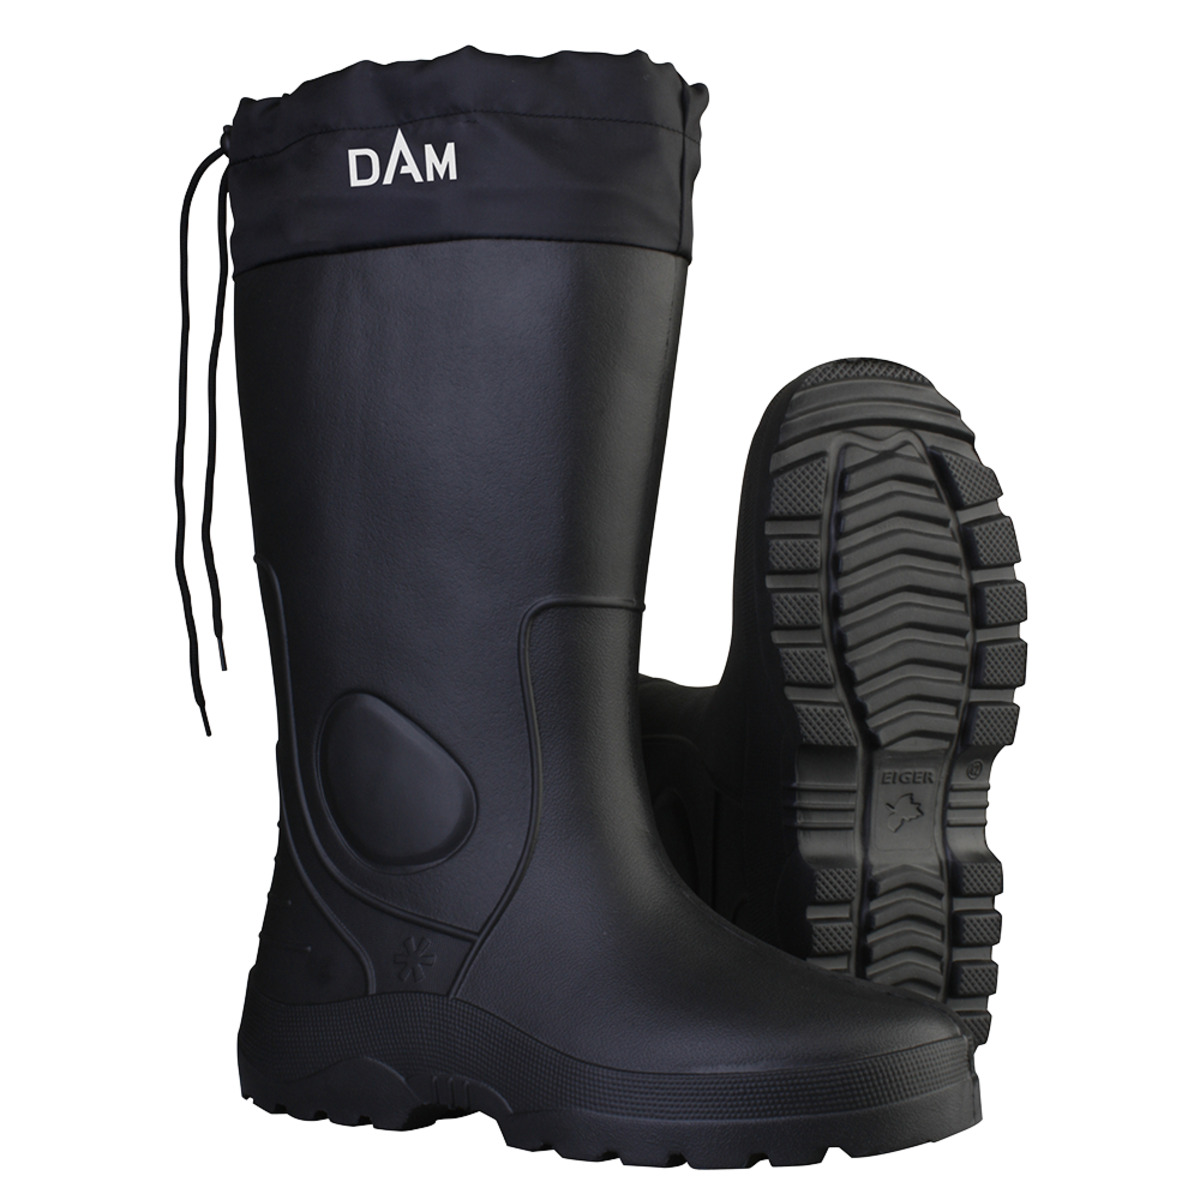 Dam Lapland Thermo Boots - 43/8 BLACK